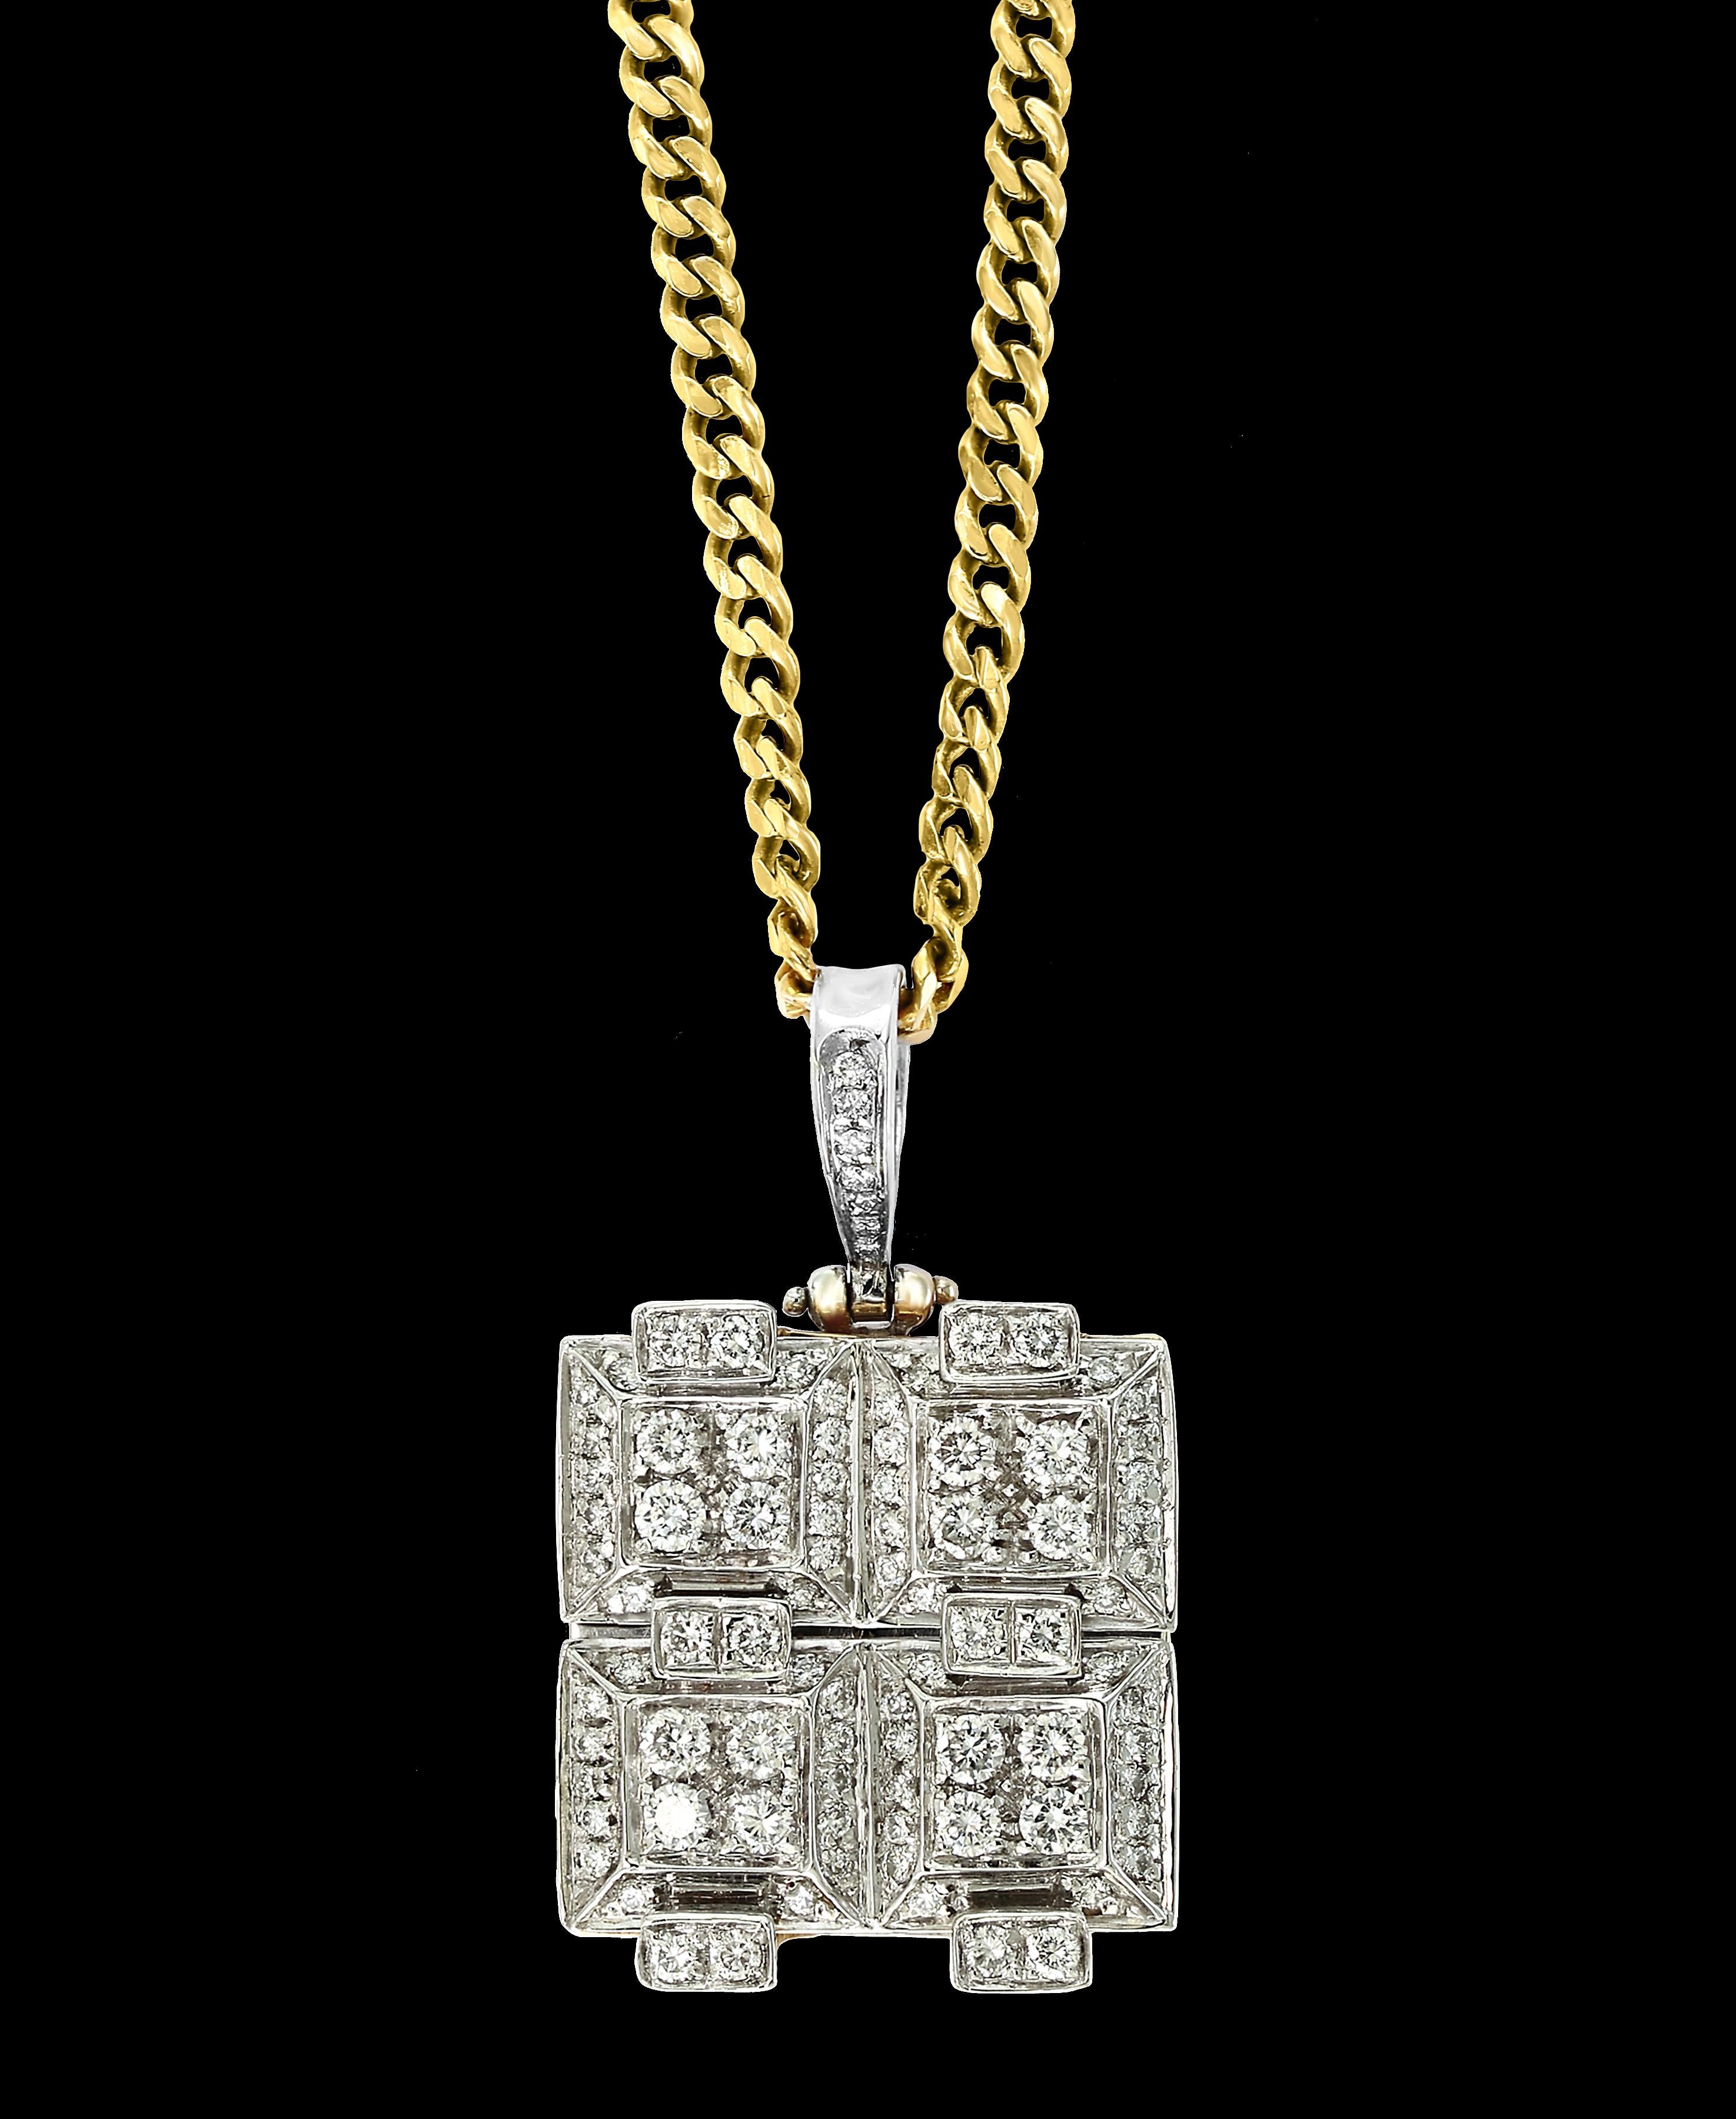 Approximately 2.5 Carat Diamond Pendant/ Necklace 18 Karat Yellow Gold With Chain 
There are 60 Round Brilliant cut diamonds 
4 Window design
Diamond Weight approximately 2.5 Carats
Diamonds are SI quality.
It has a large bail so fit in to a wide